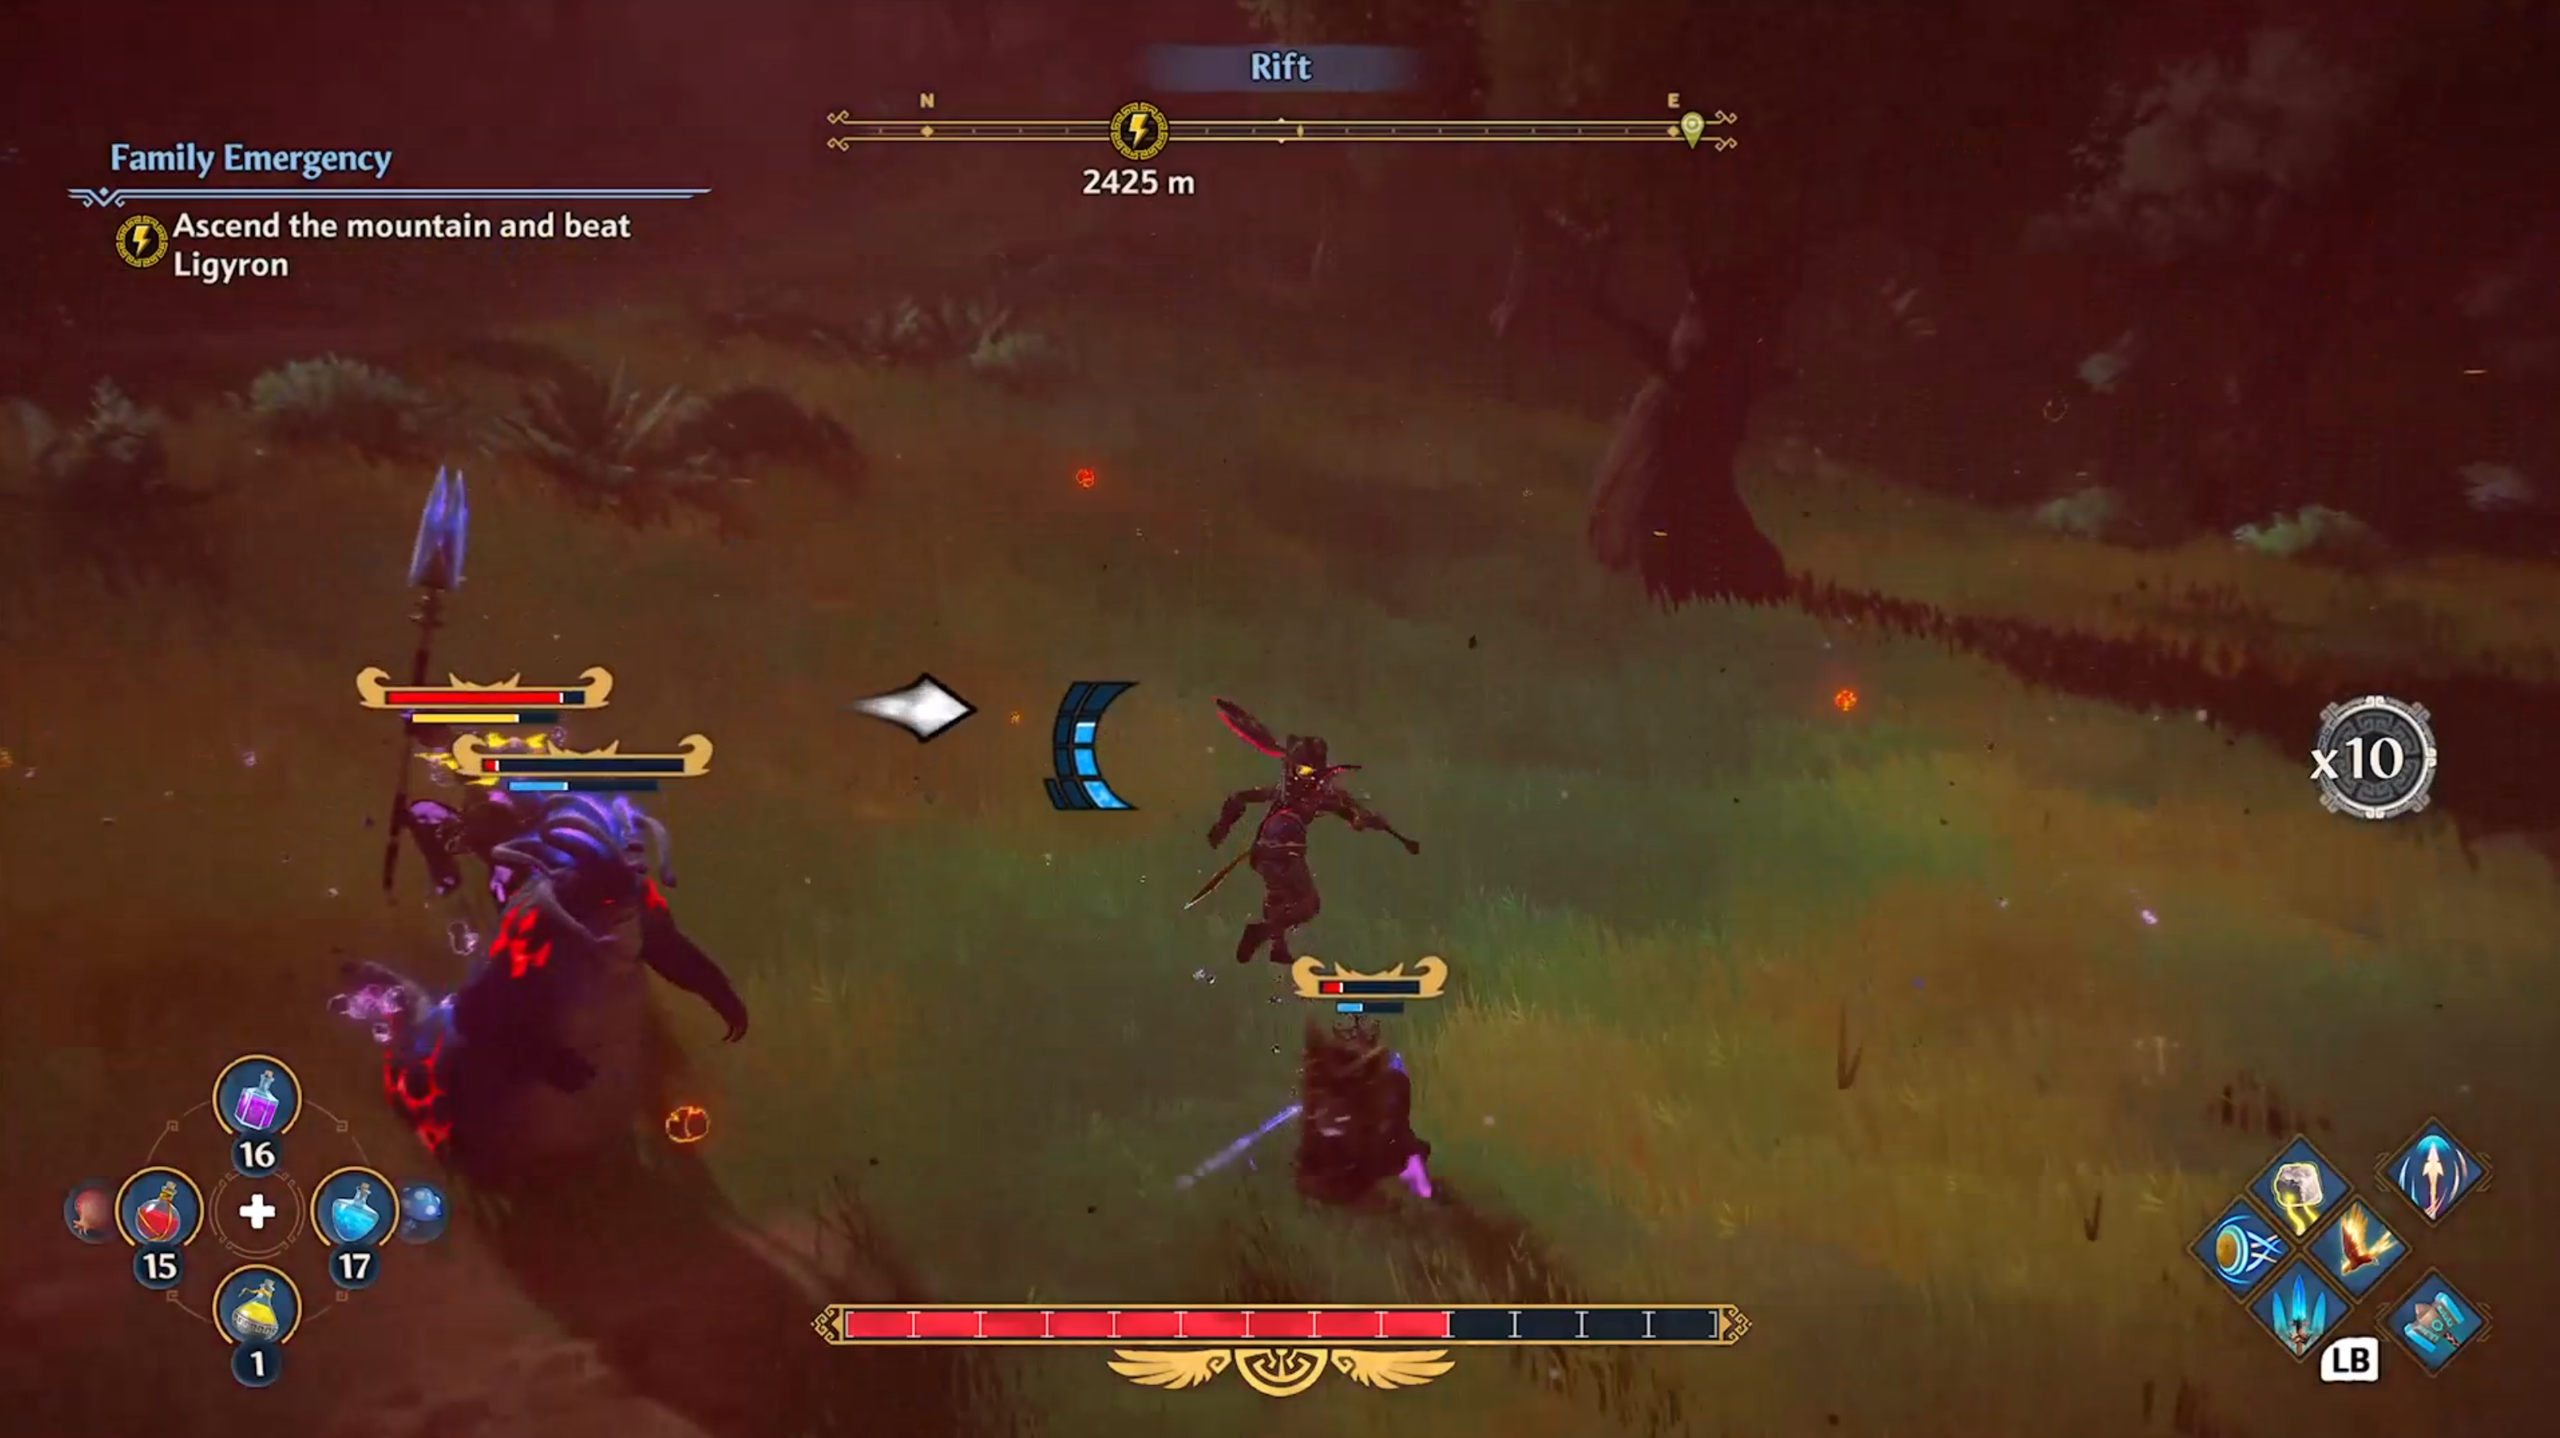 Screenshot of Immortals Fenyx Rising showing a white arrow with black outline pointing left from the playable character towards an enemy readying an attack.